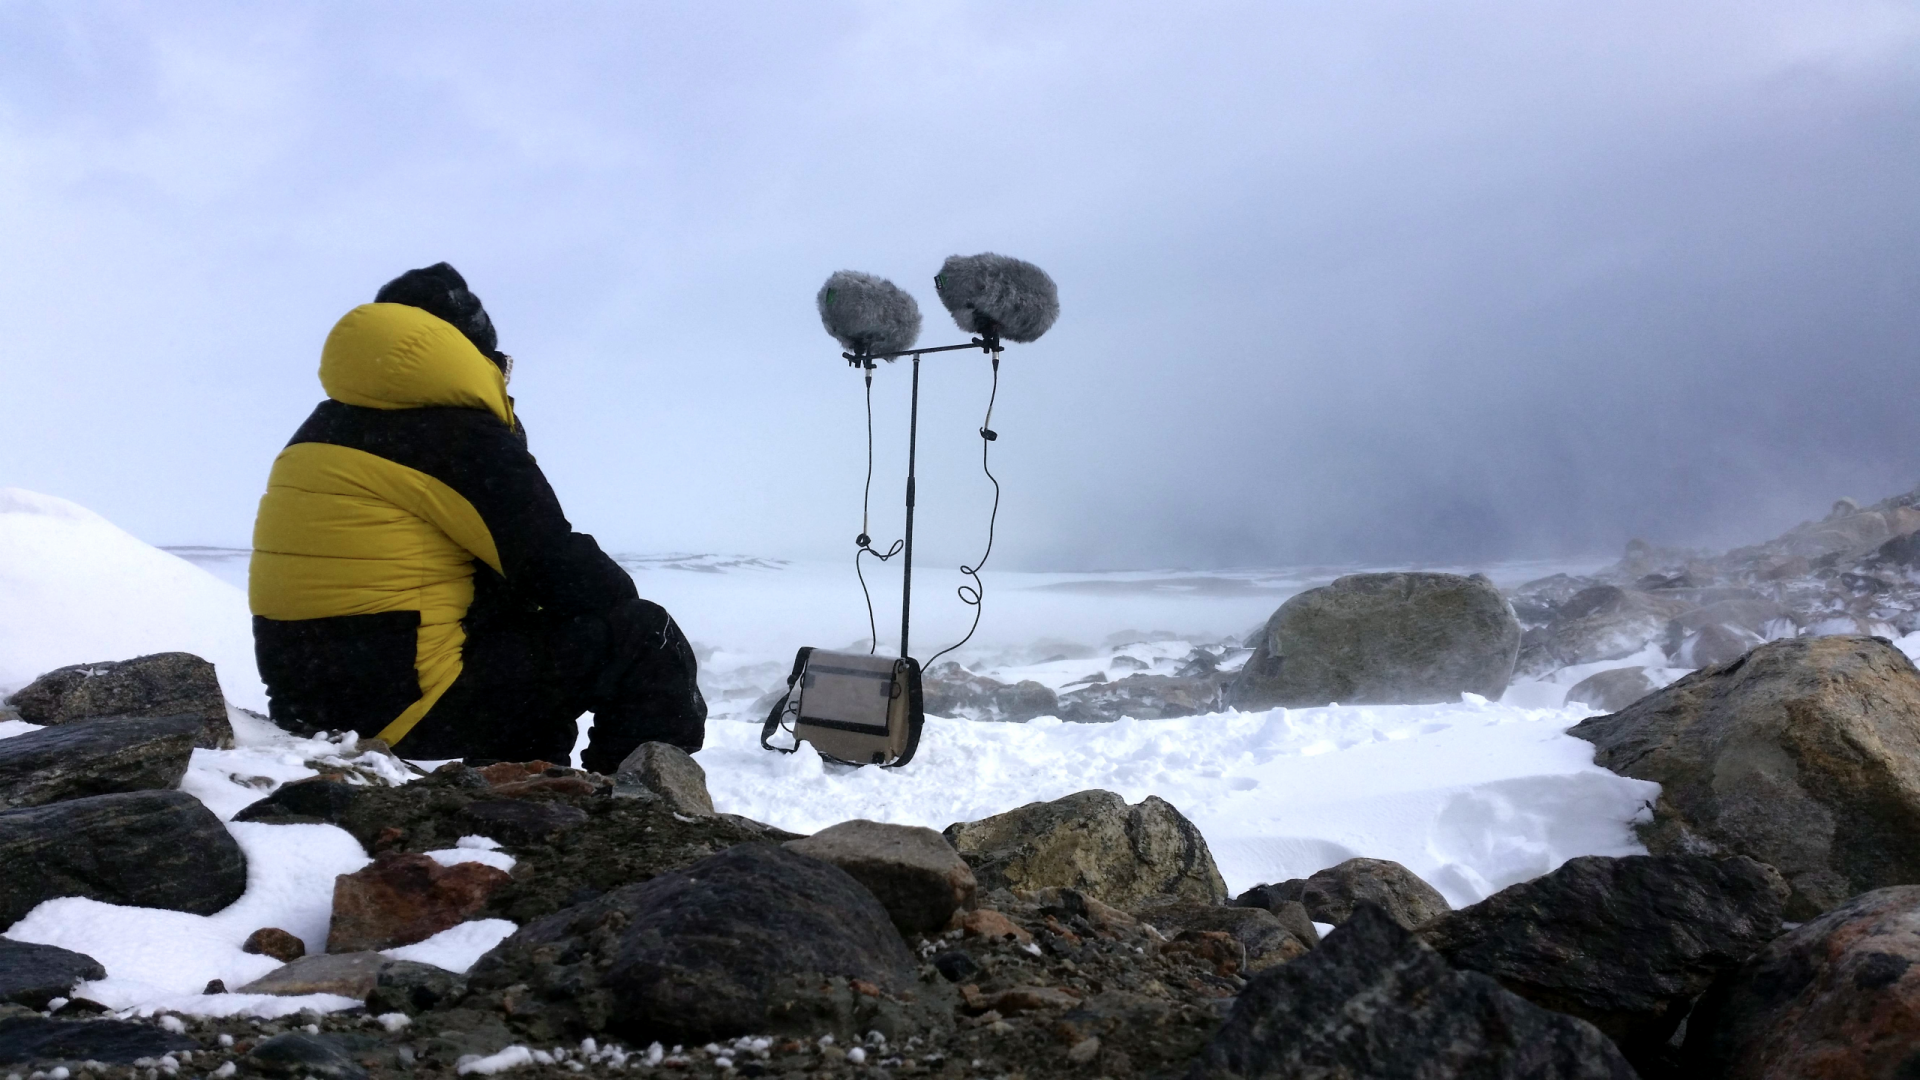 A man in a yellow and black puffy jacket sits to the left on 2 fluffy microphones on tall stands. He is in the now in Antarctica